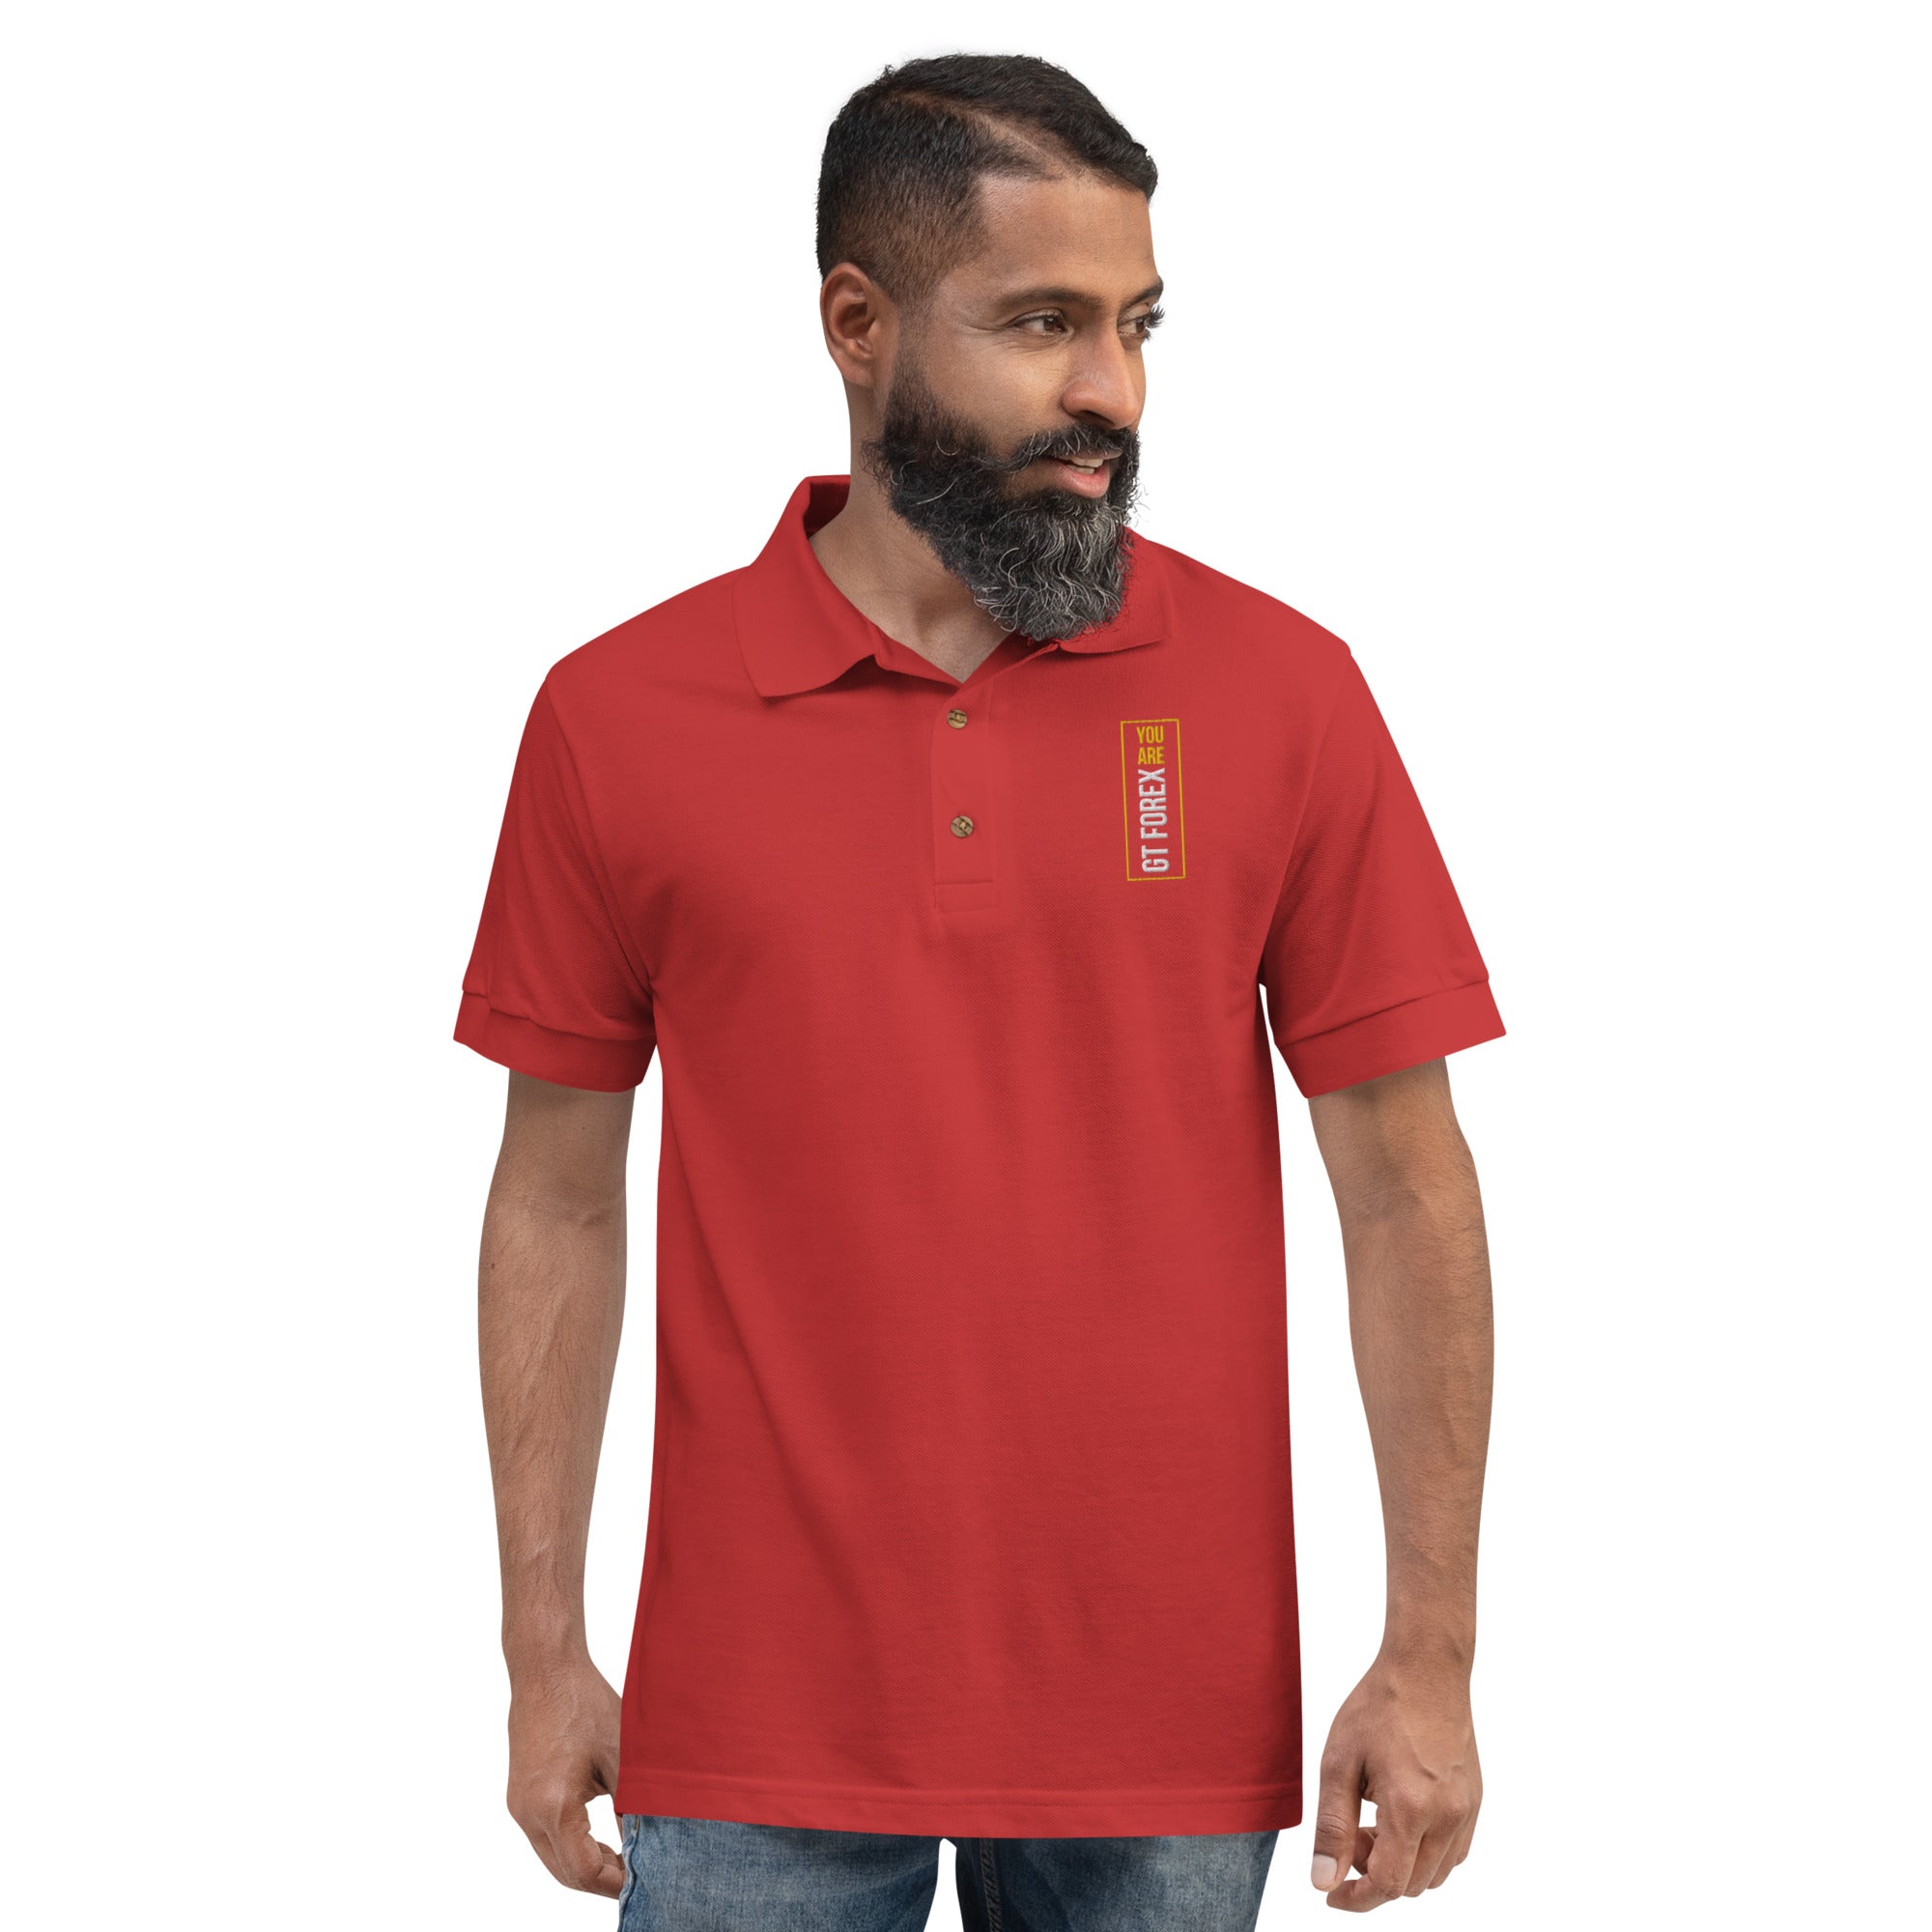 YOU ARE GT Embroidered Polo Shirt